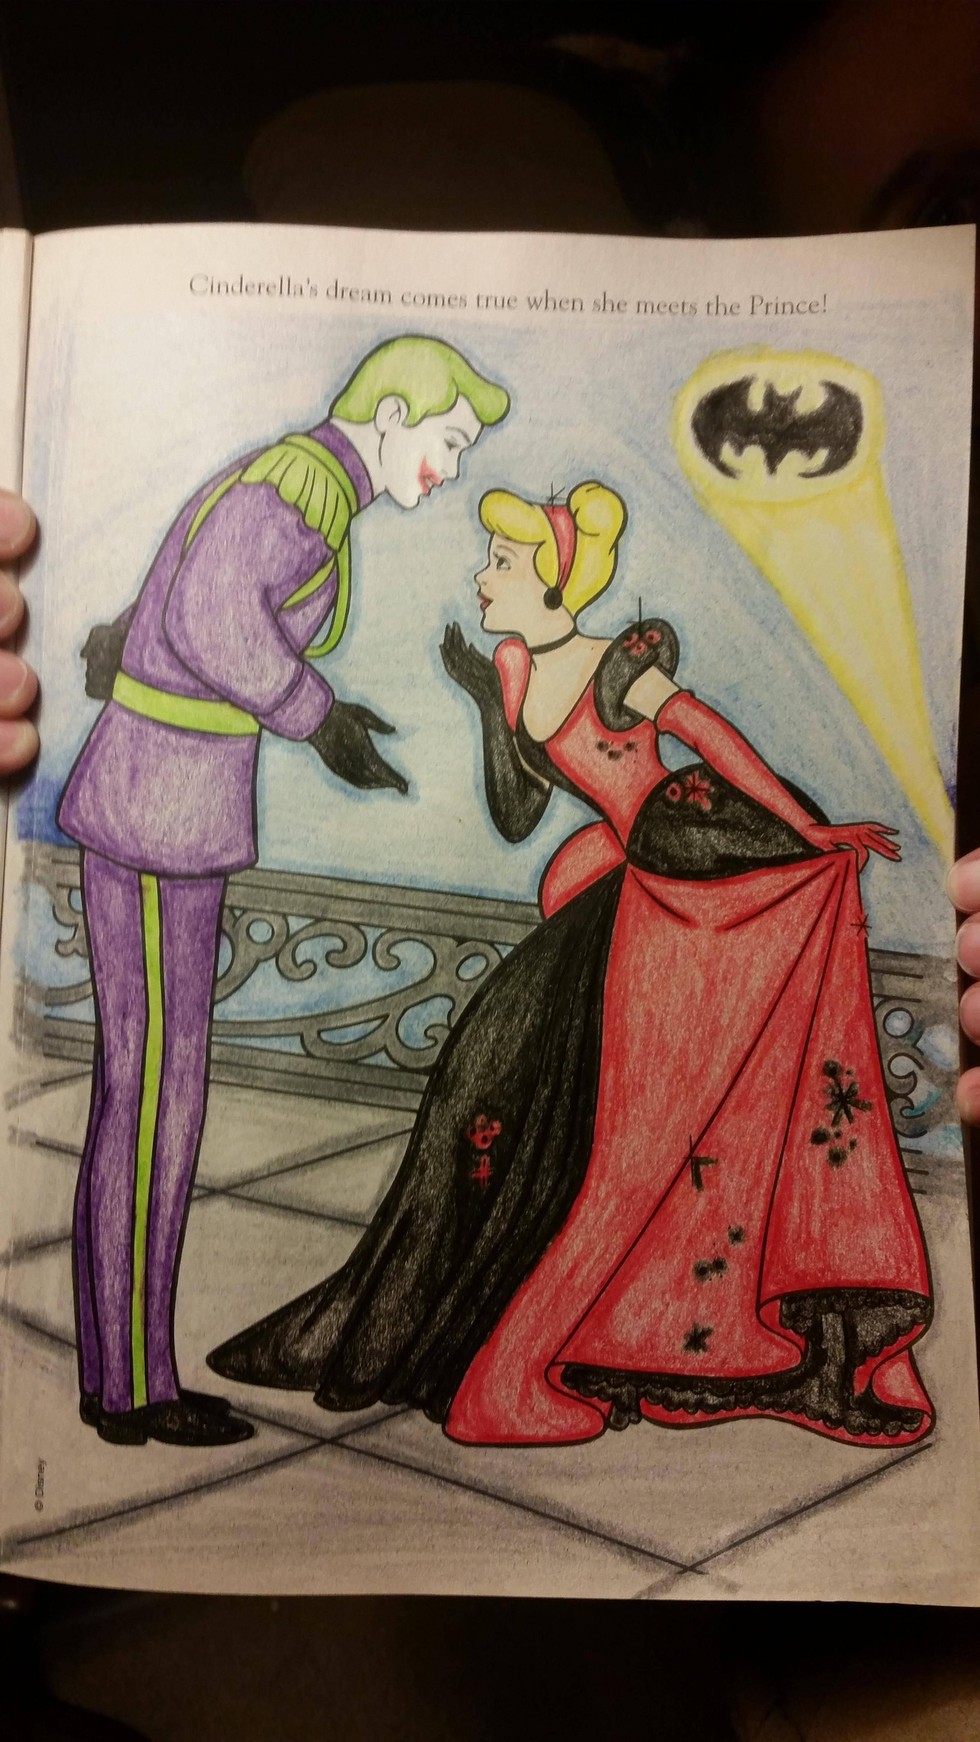 coloring books corrupted ruin childhood harley joker princess prince quinn imgur cinderella mad meets batman abuse disney colouring architecturendesign ad